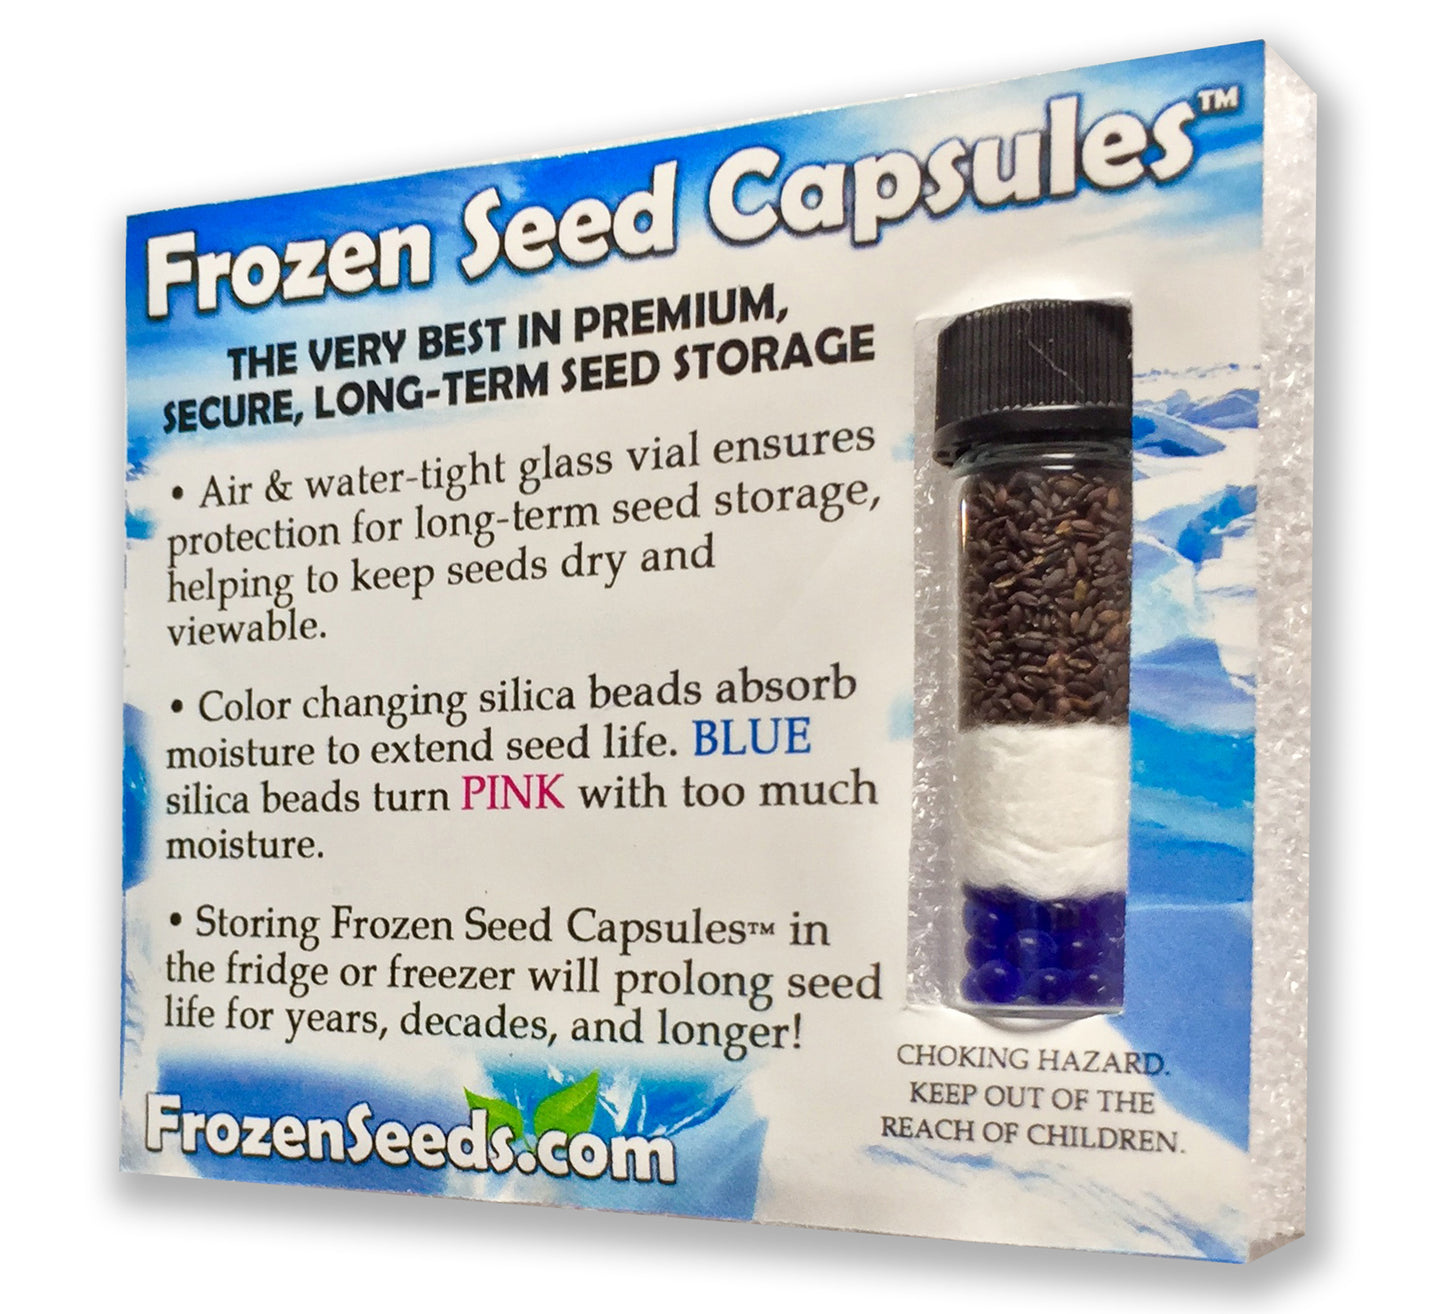 Frozen Seed Capsules™ 'Do-It-Yourself' DIY Small Seed Storage Capsules - Ideal for Small Seeds - The Very Best in Proper Long-term Seed Storage